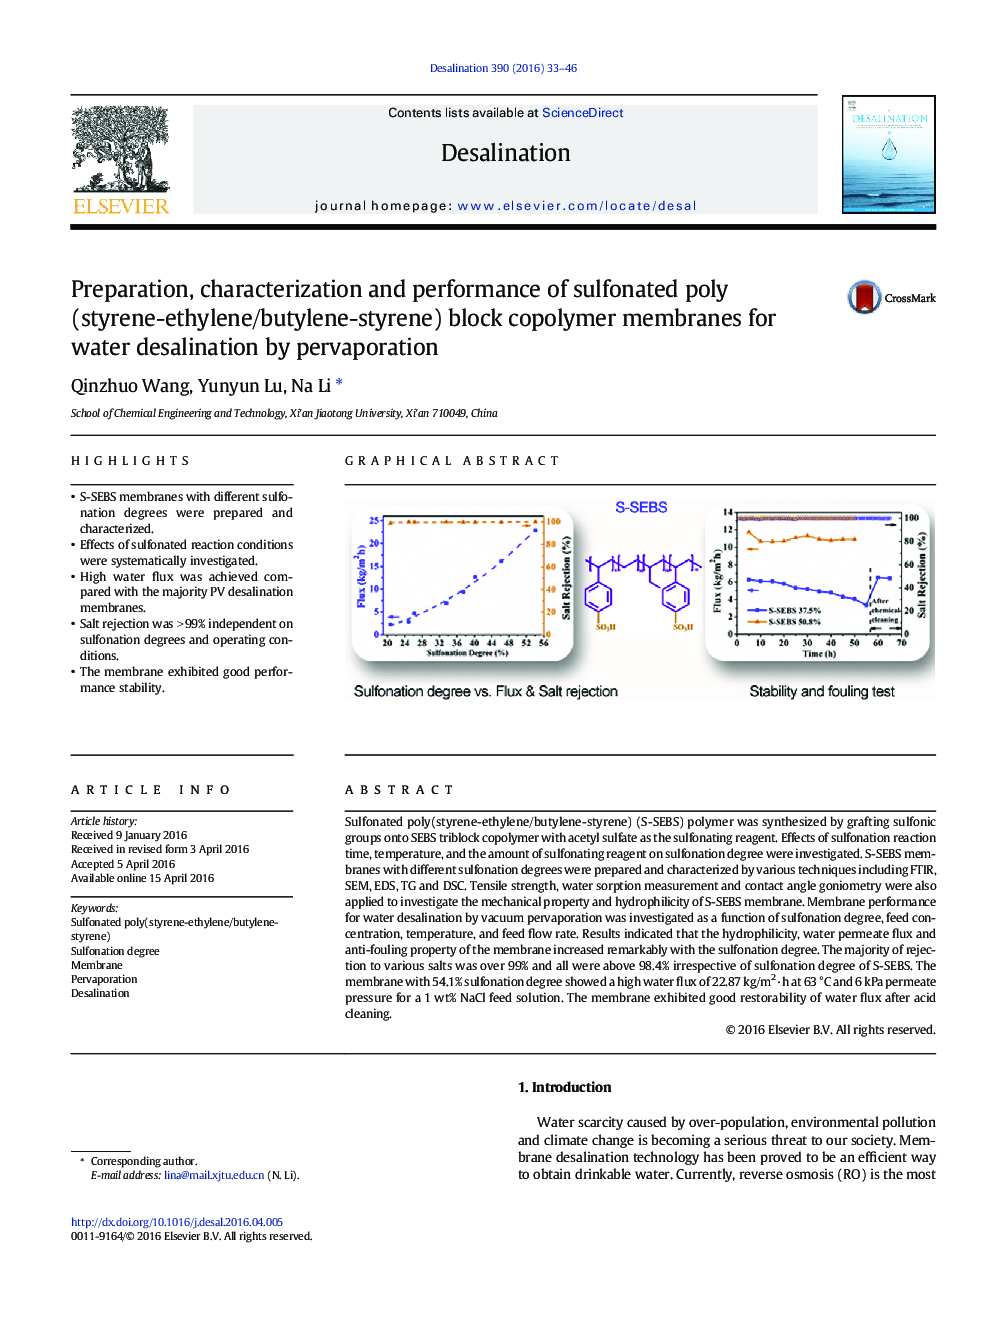 Preparation, characterization and performance of sulfonated poly(styrene-ethylene/butylene-styrene) block copolymer membranes for water desalination by pervaporation